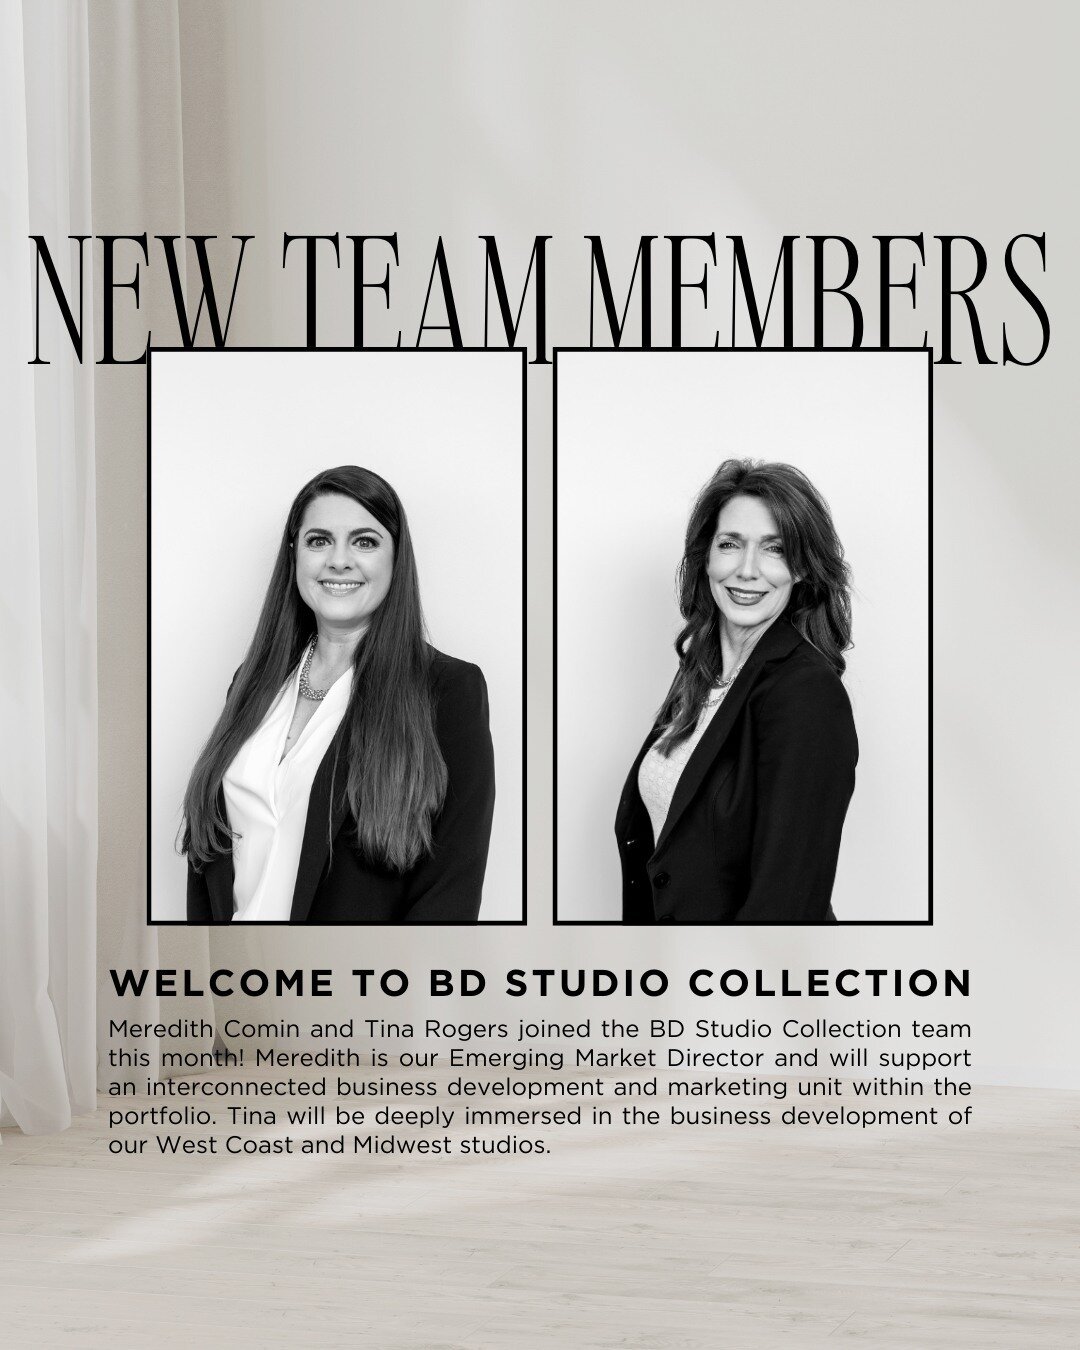 Say HELLO to the newest team members of BD Studio Collection - Meredith Comin and Tina Rogers! 👋🏻

👉🏻 Meredith Comin - Emerging Market Director
Meredith will support an interconnected business development and marketing unit within the portfolio. 